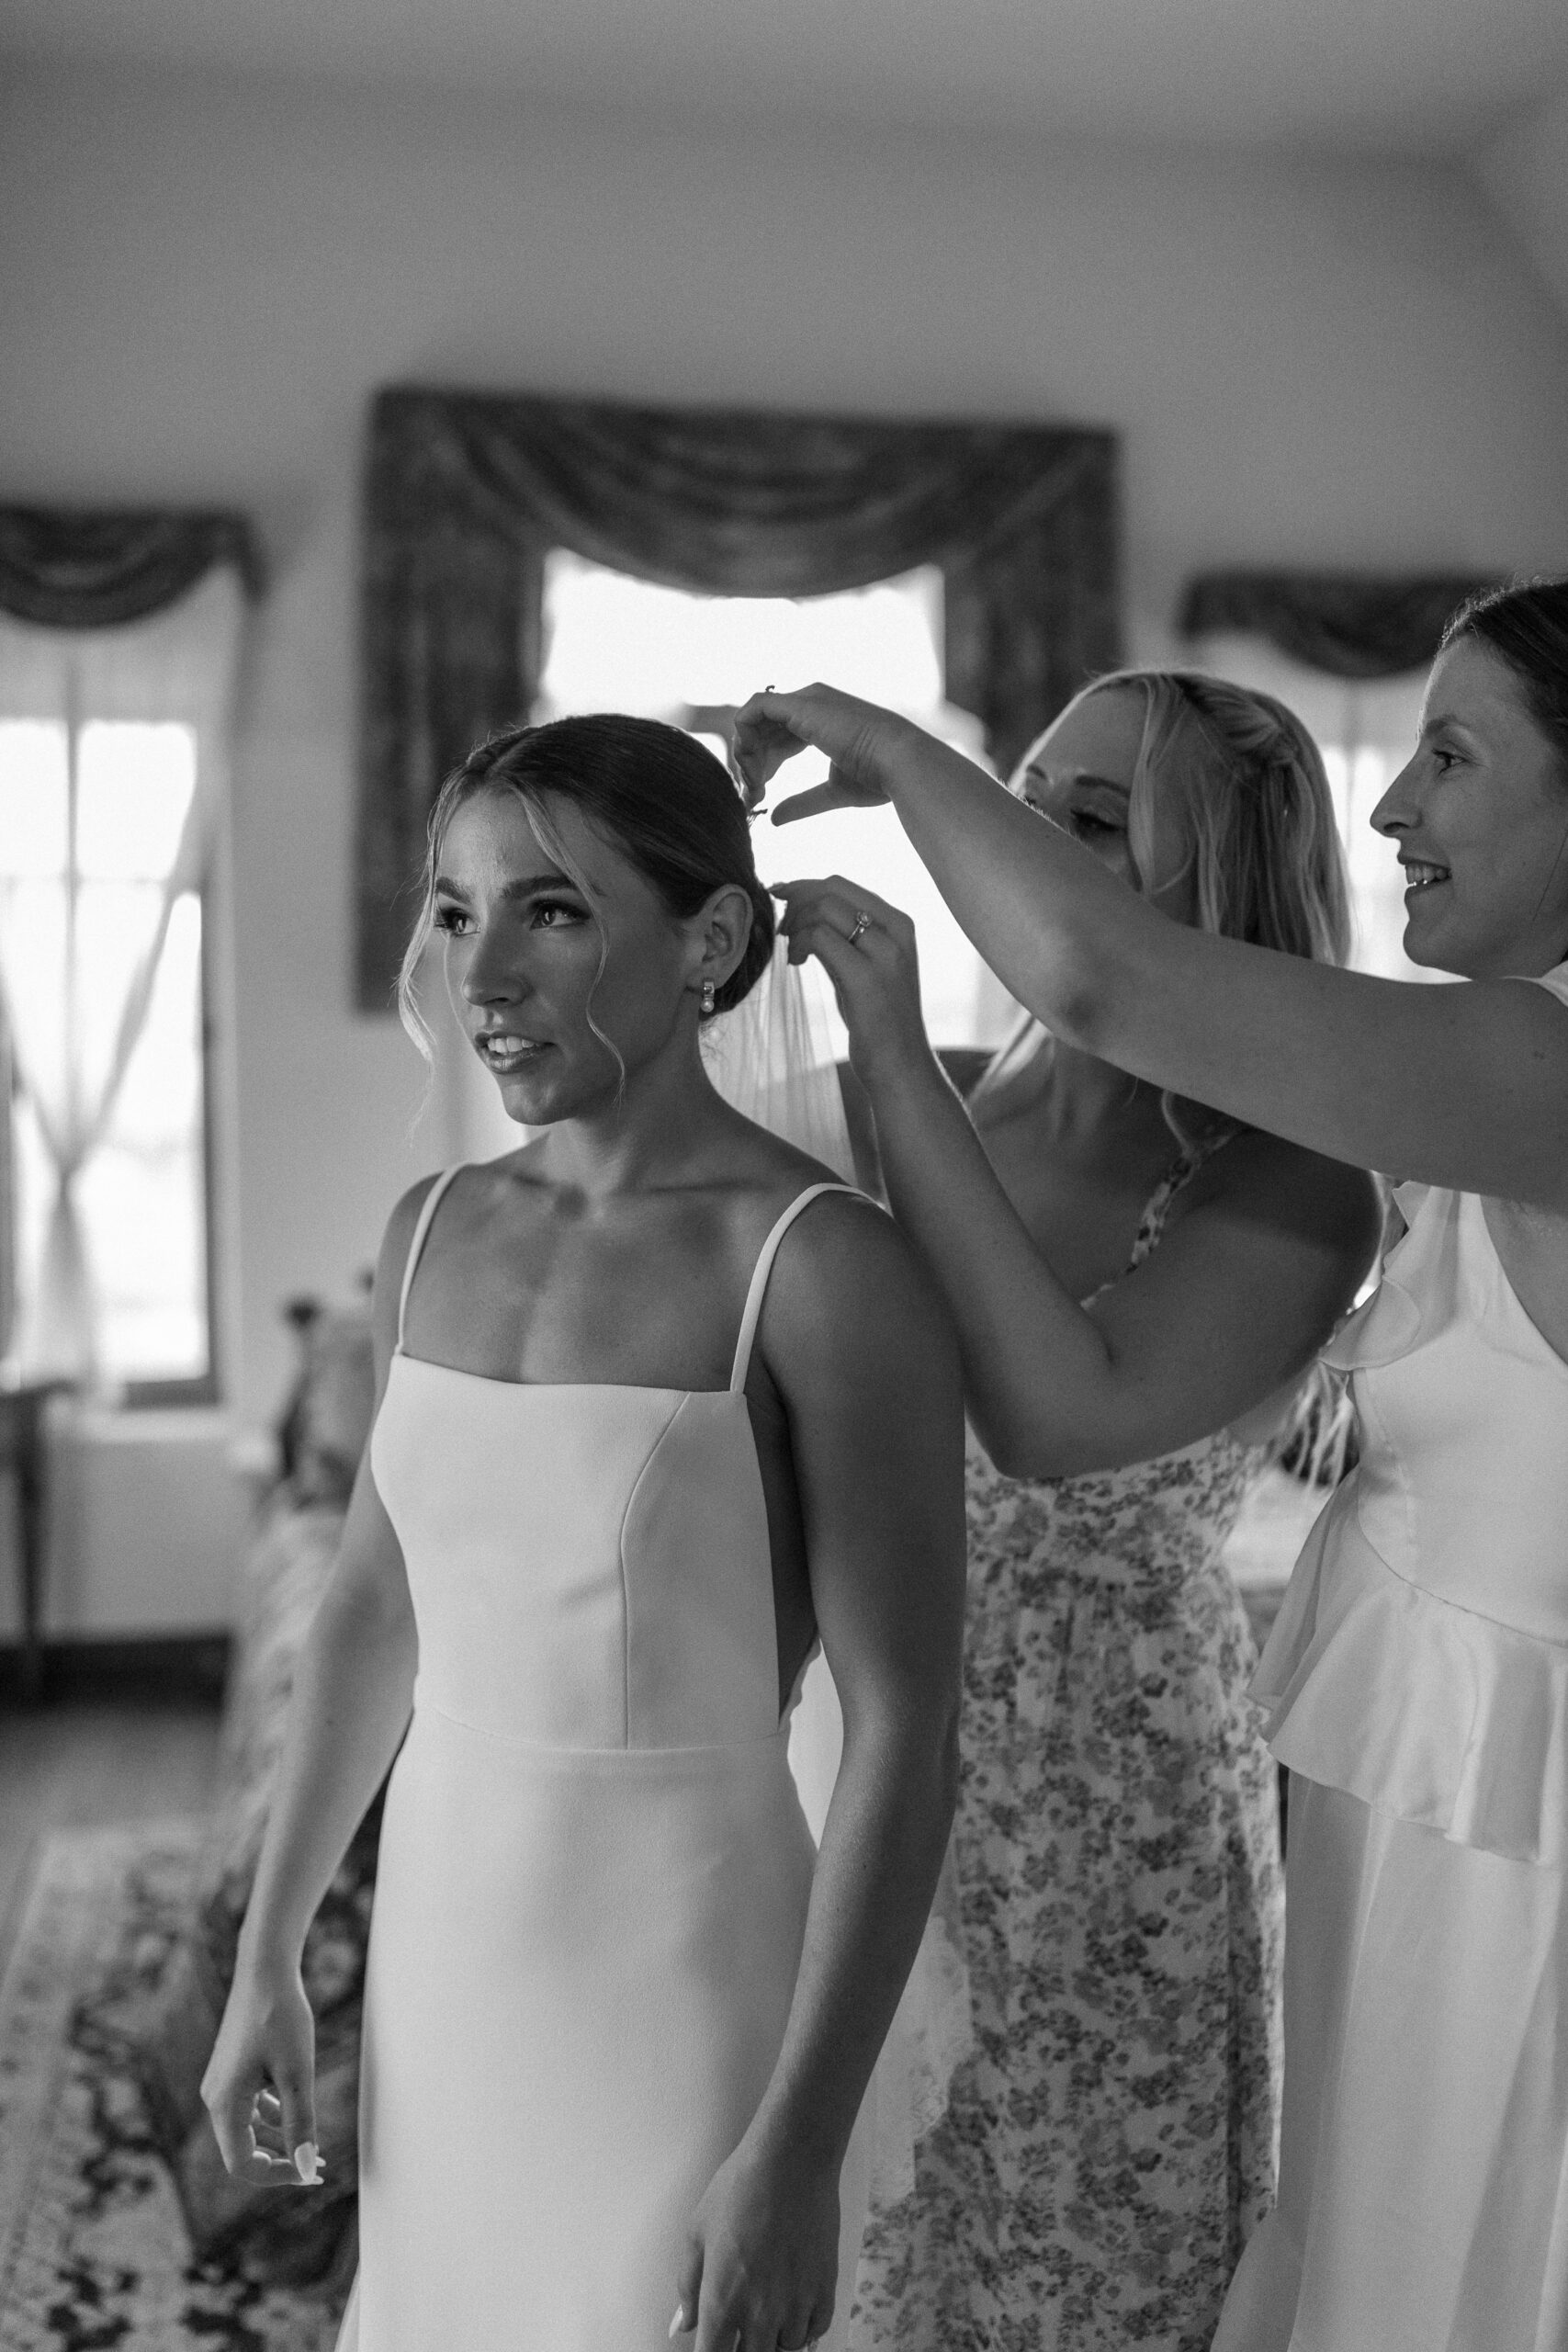 Black and white photos of hanging wedding dress and bride getting ready